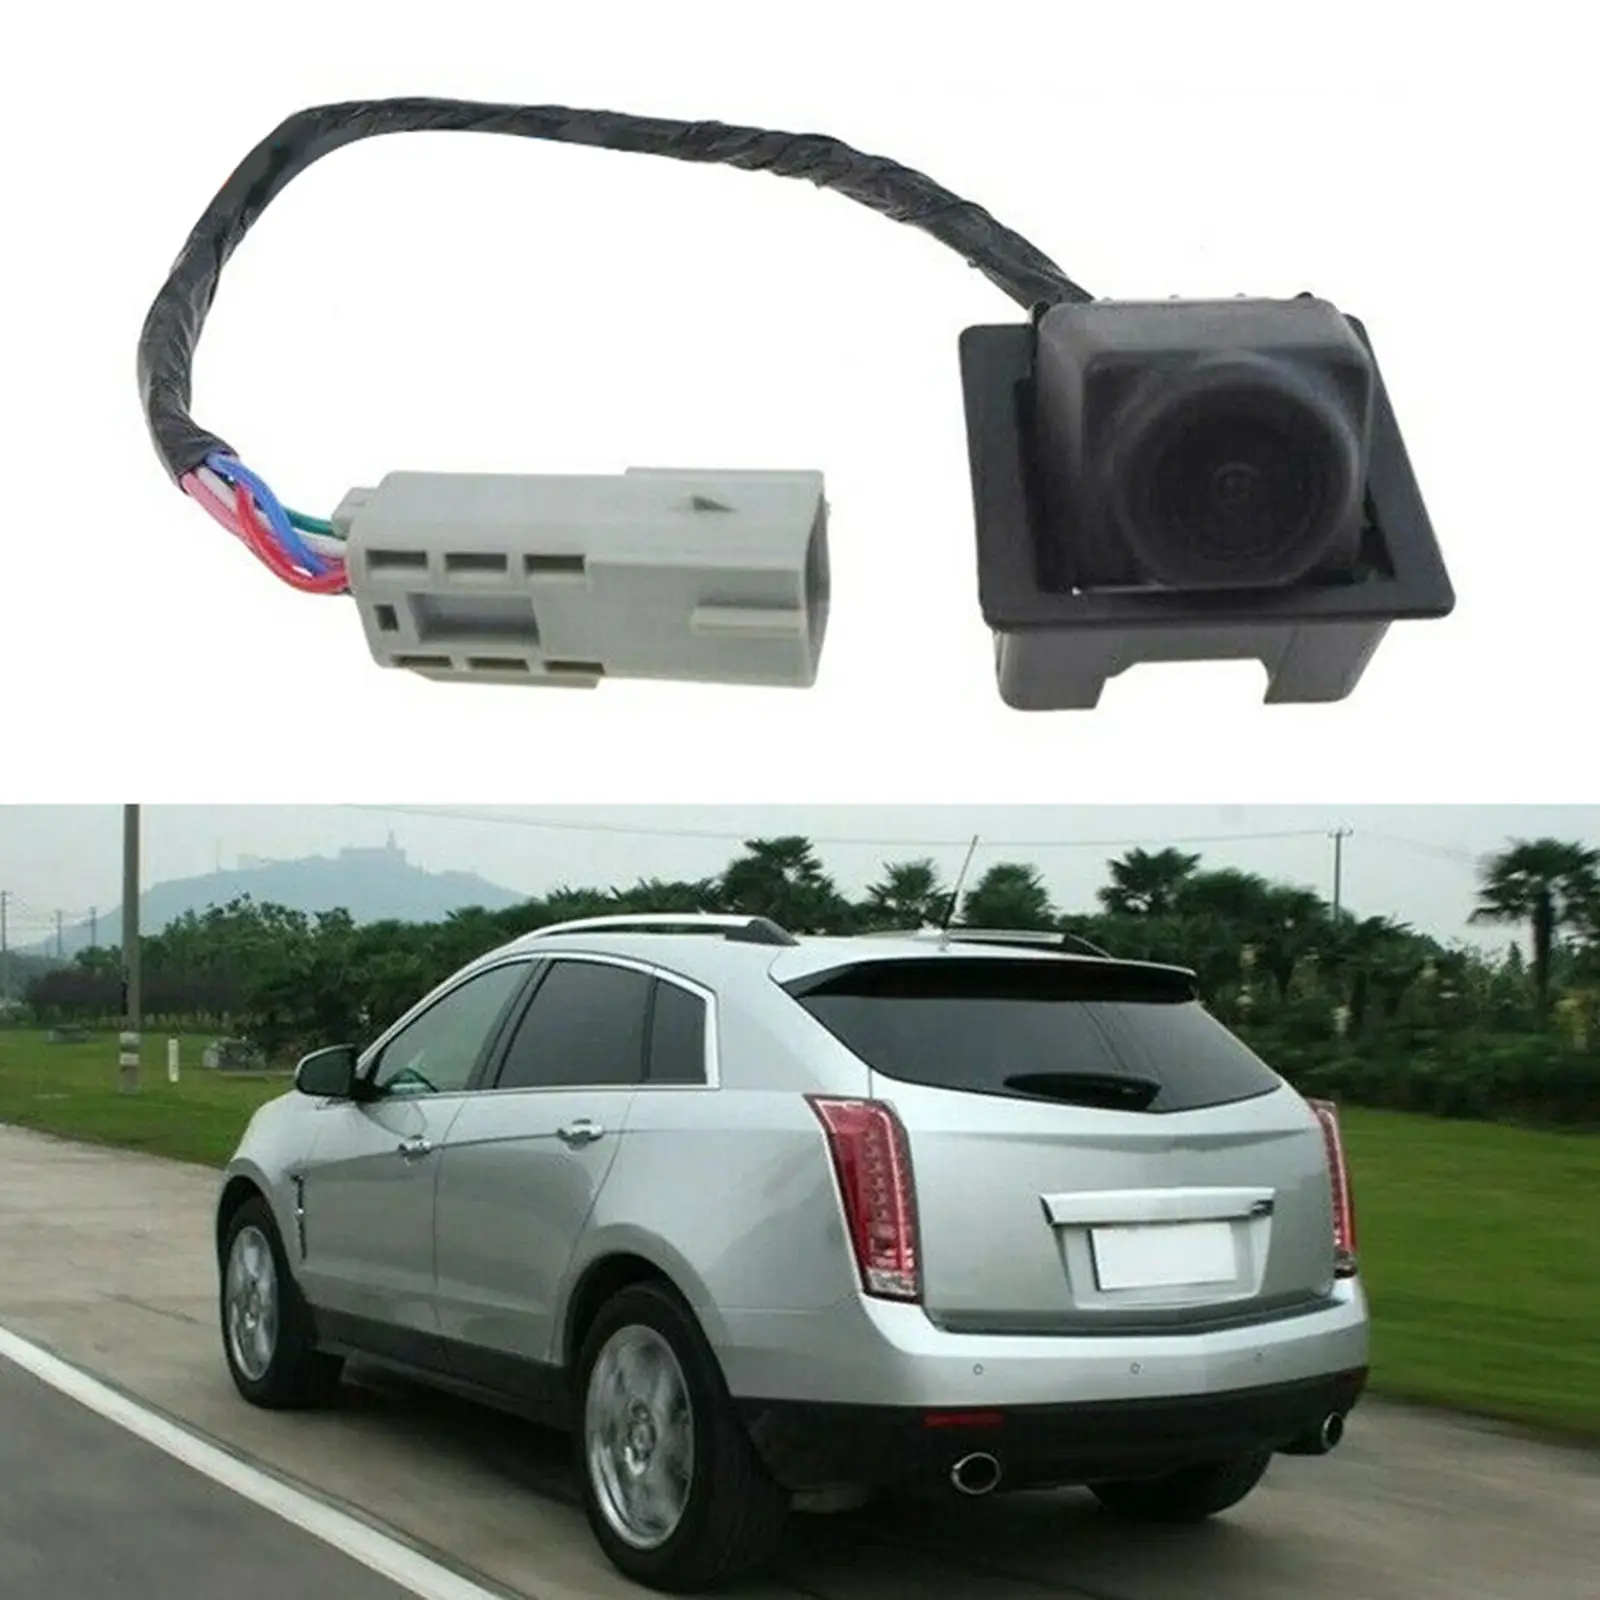 CCD Rear View Backup Camera For Cadillac SRX 2010-2016 Car Parking Assistance 